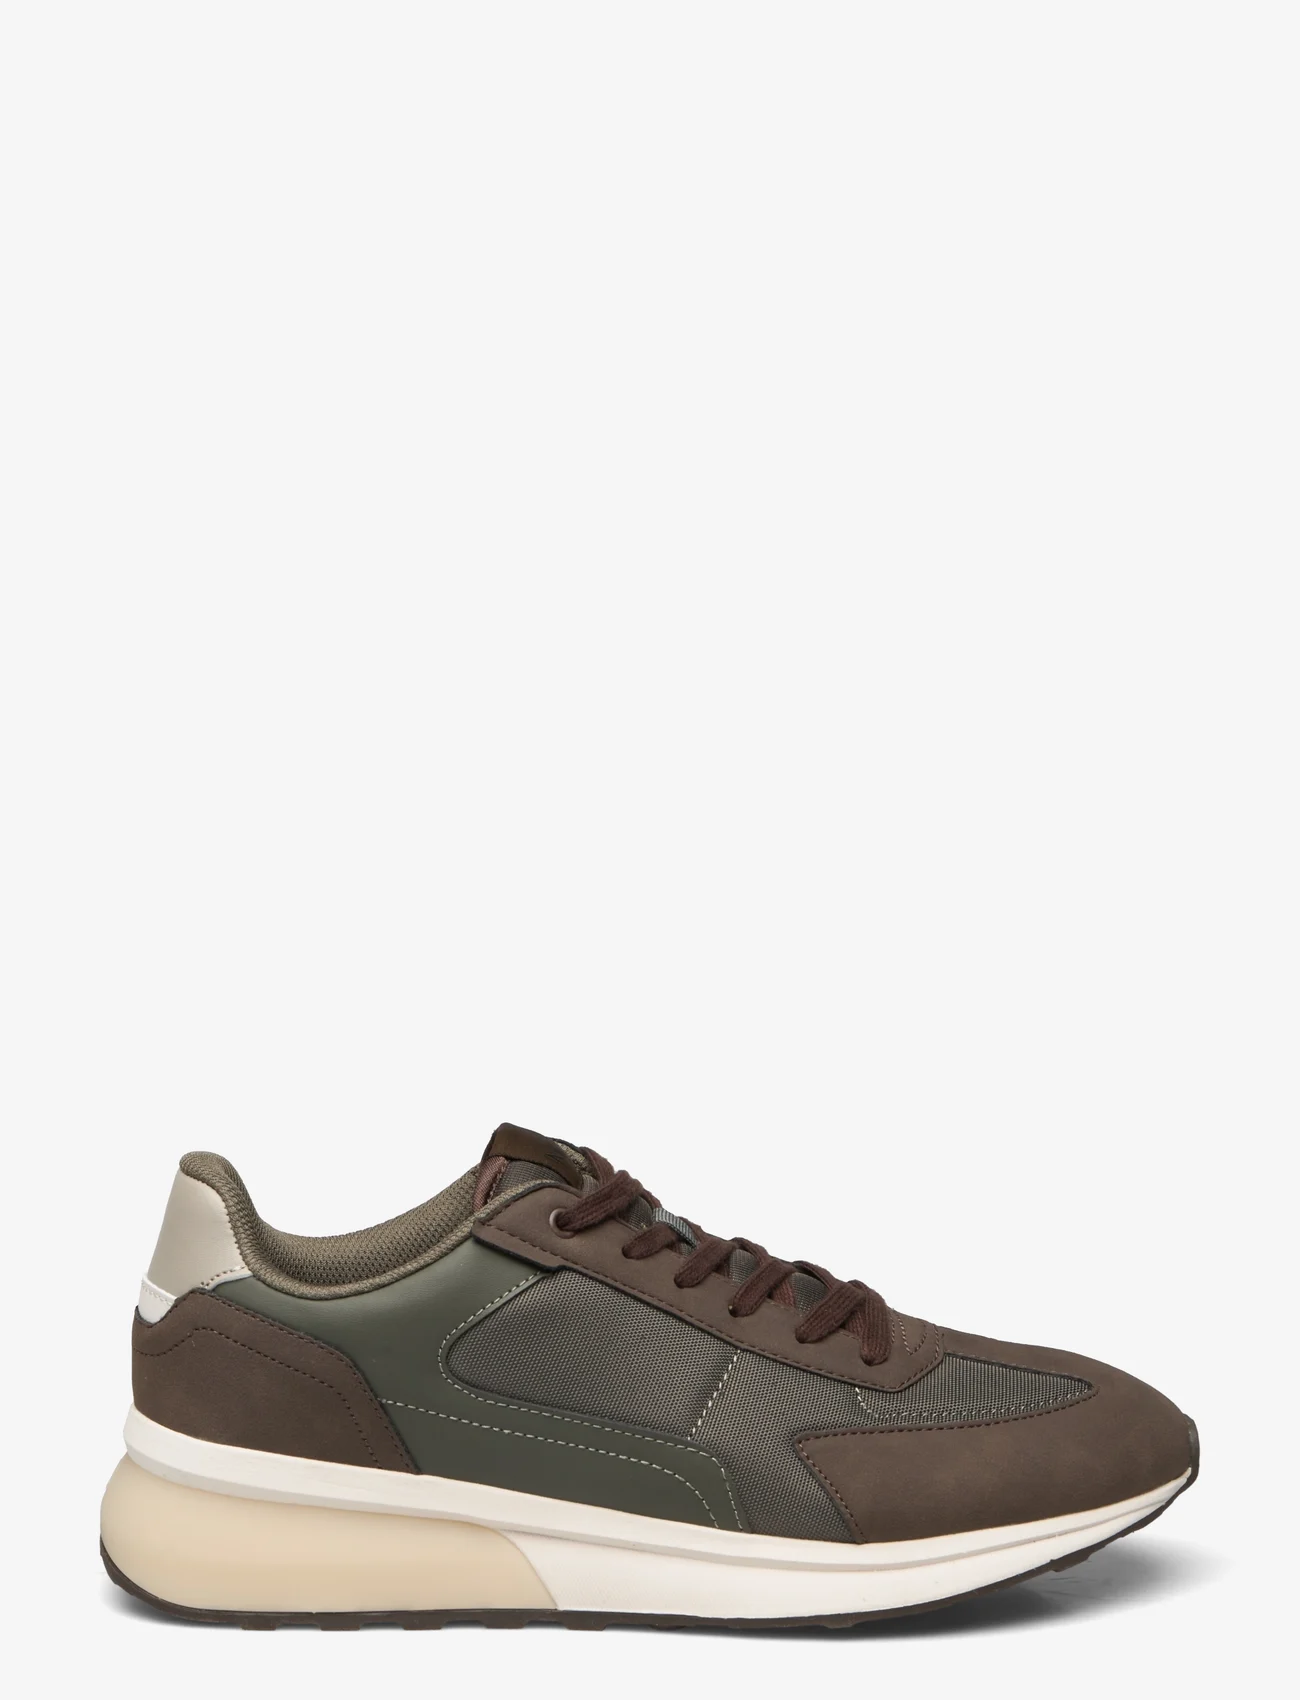 Mango - Leather mixed sneakers - lave sneakers - beige - khaki - 1